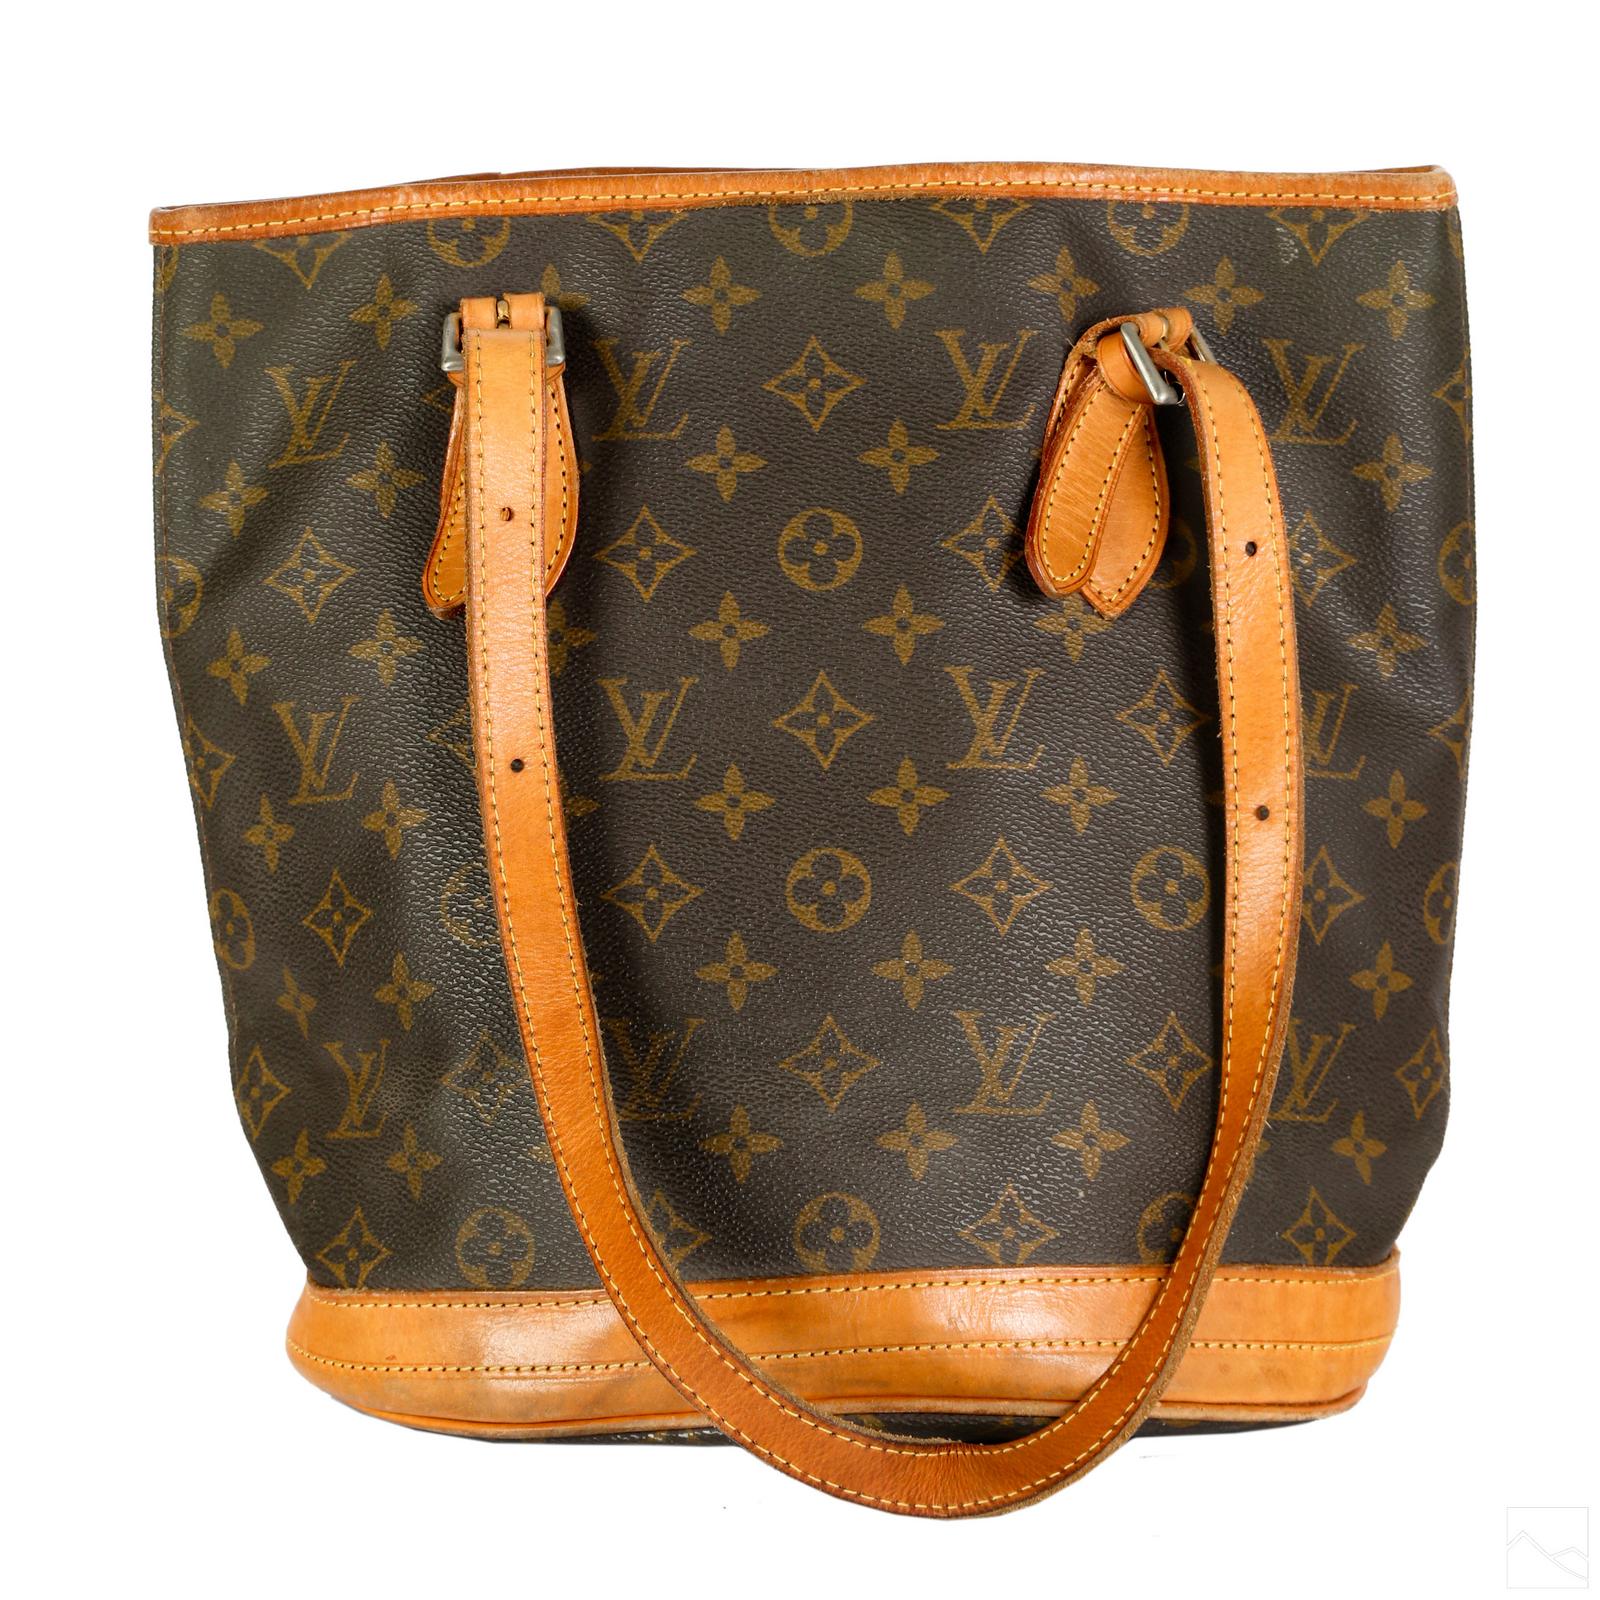 At Auction: Small Louis Vuitton Branded Purse